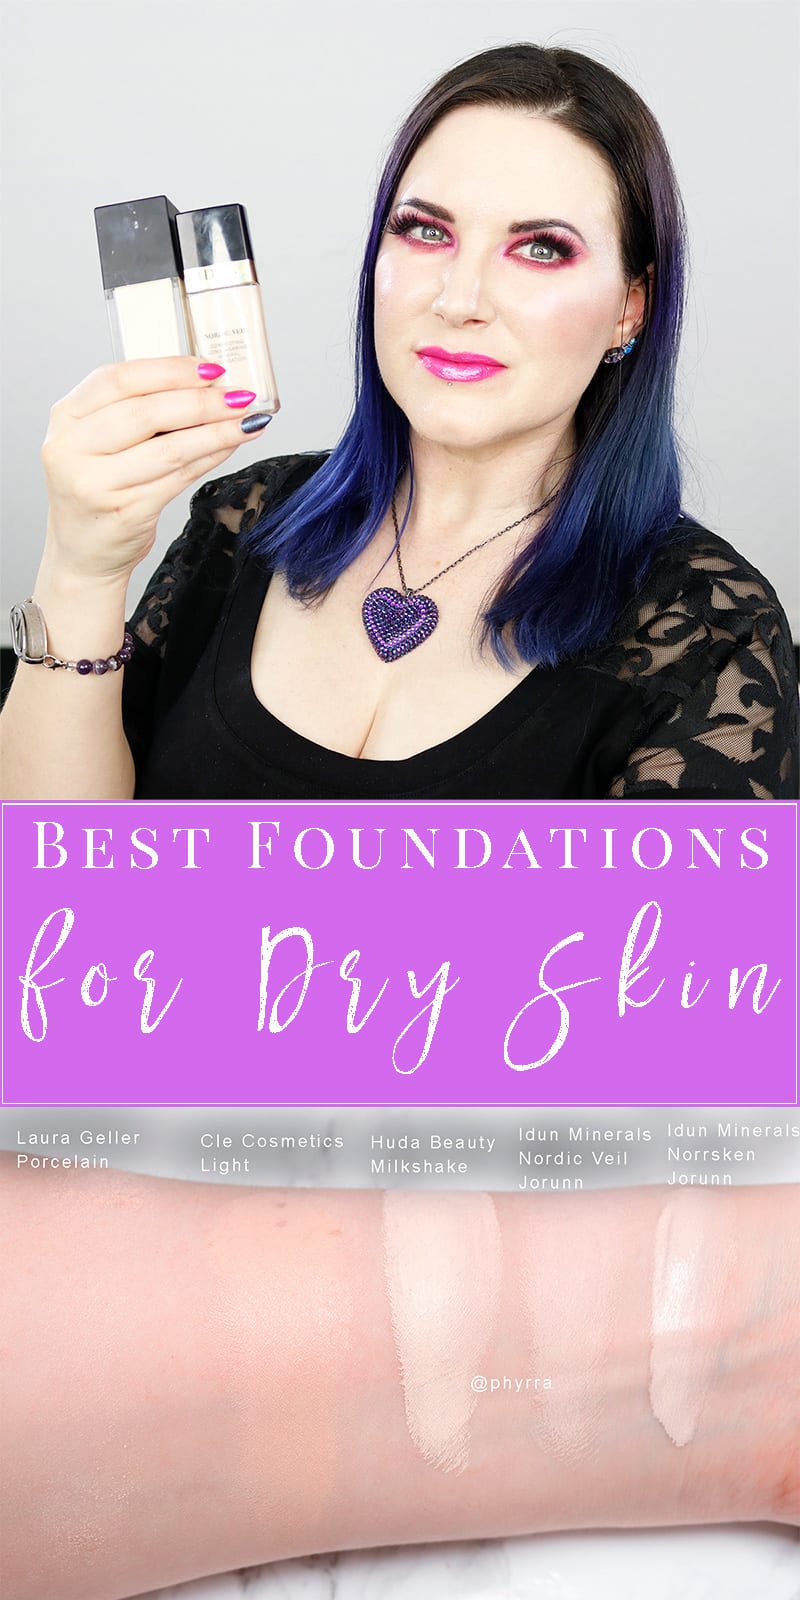 Best Foundations for Dry Skin - I share the best foundations for dry skin, pale skin, cruelty free and vegan makeup